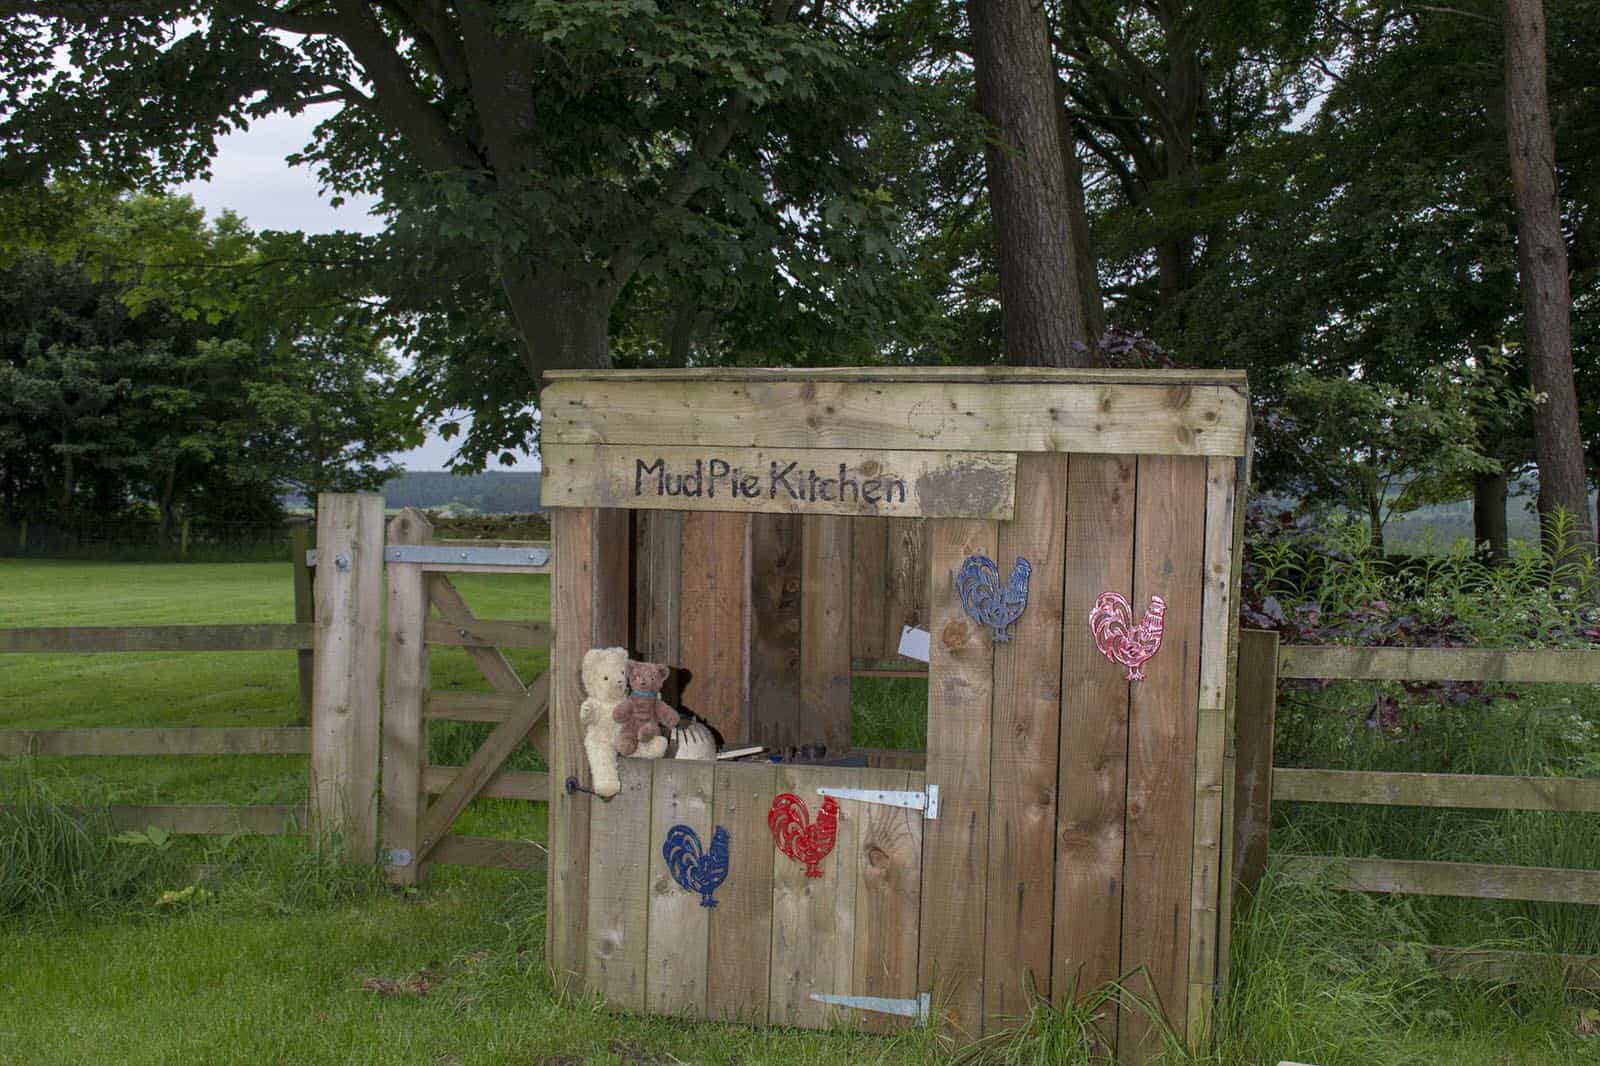 Childrens outdoor play area with mud pie kitchen